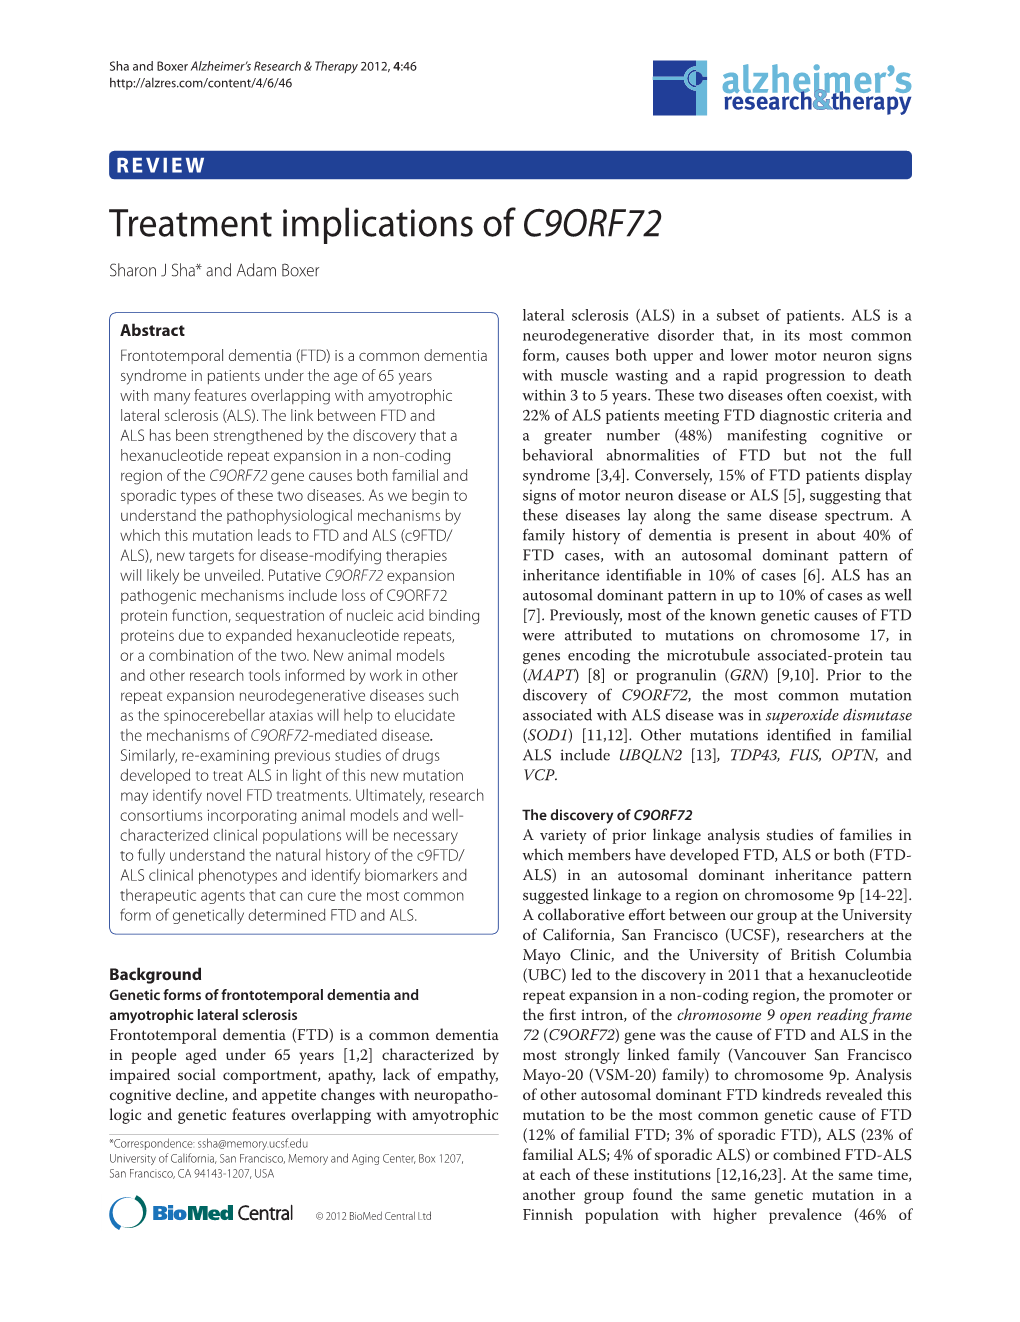 VIEW Treatment Implications of C9ORF72 Sharon J Sha* and Adam Boxer